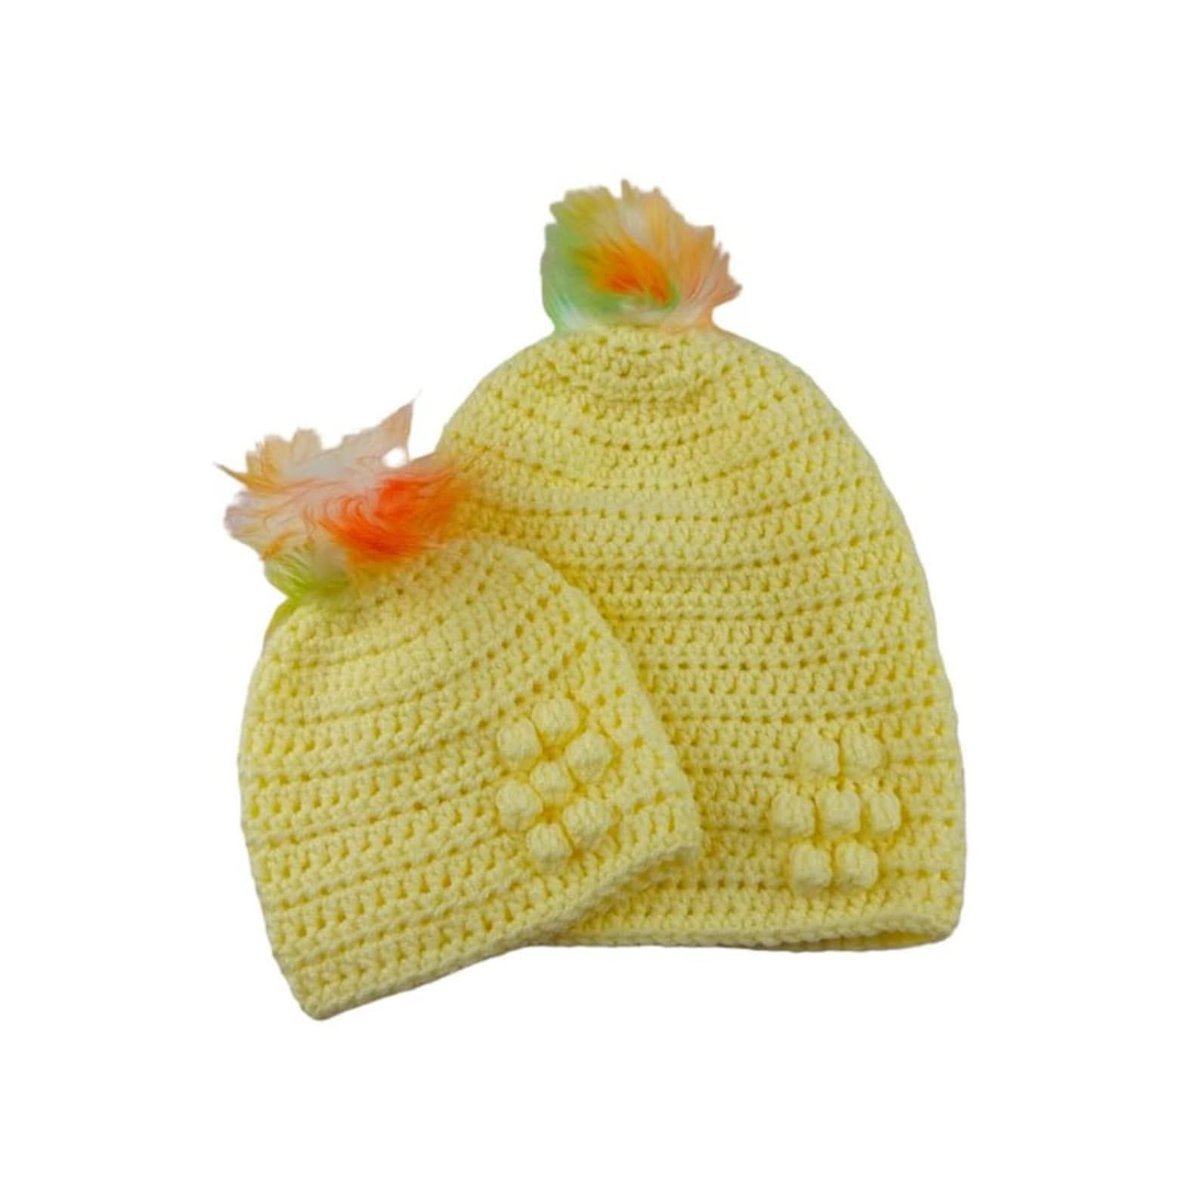 Brighten up your day and your little one's with these matching lemon crocheted hats. Adorned with flower detail and playful pompoms, they're a must-have for style-savvy mums and babies knittingtopia.etsy.com/listing/167118… #Knittingtopia #HandmadeWithLove #etsy #craftbizparty #MHHSBD #tweetuk